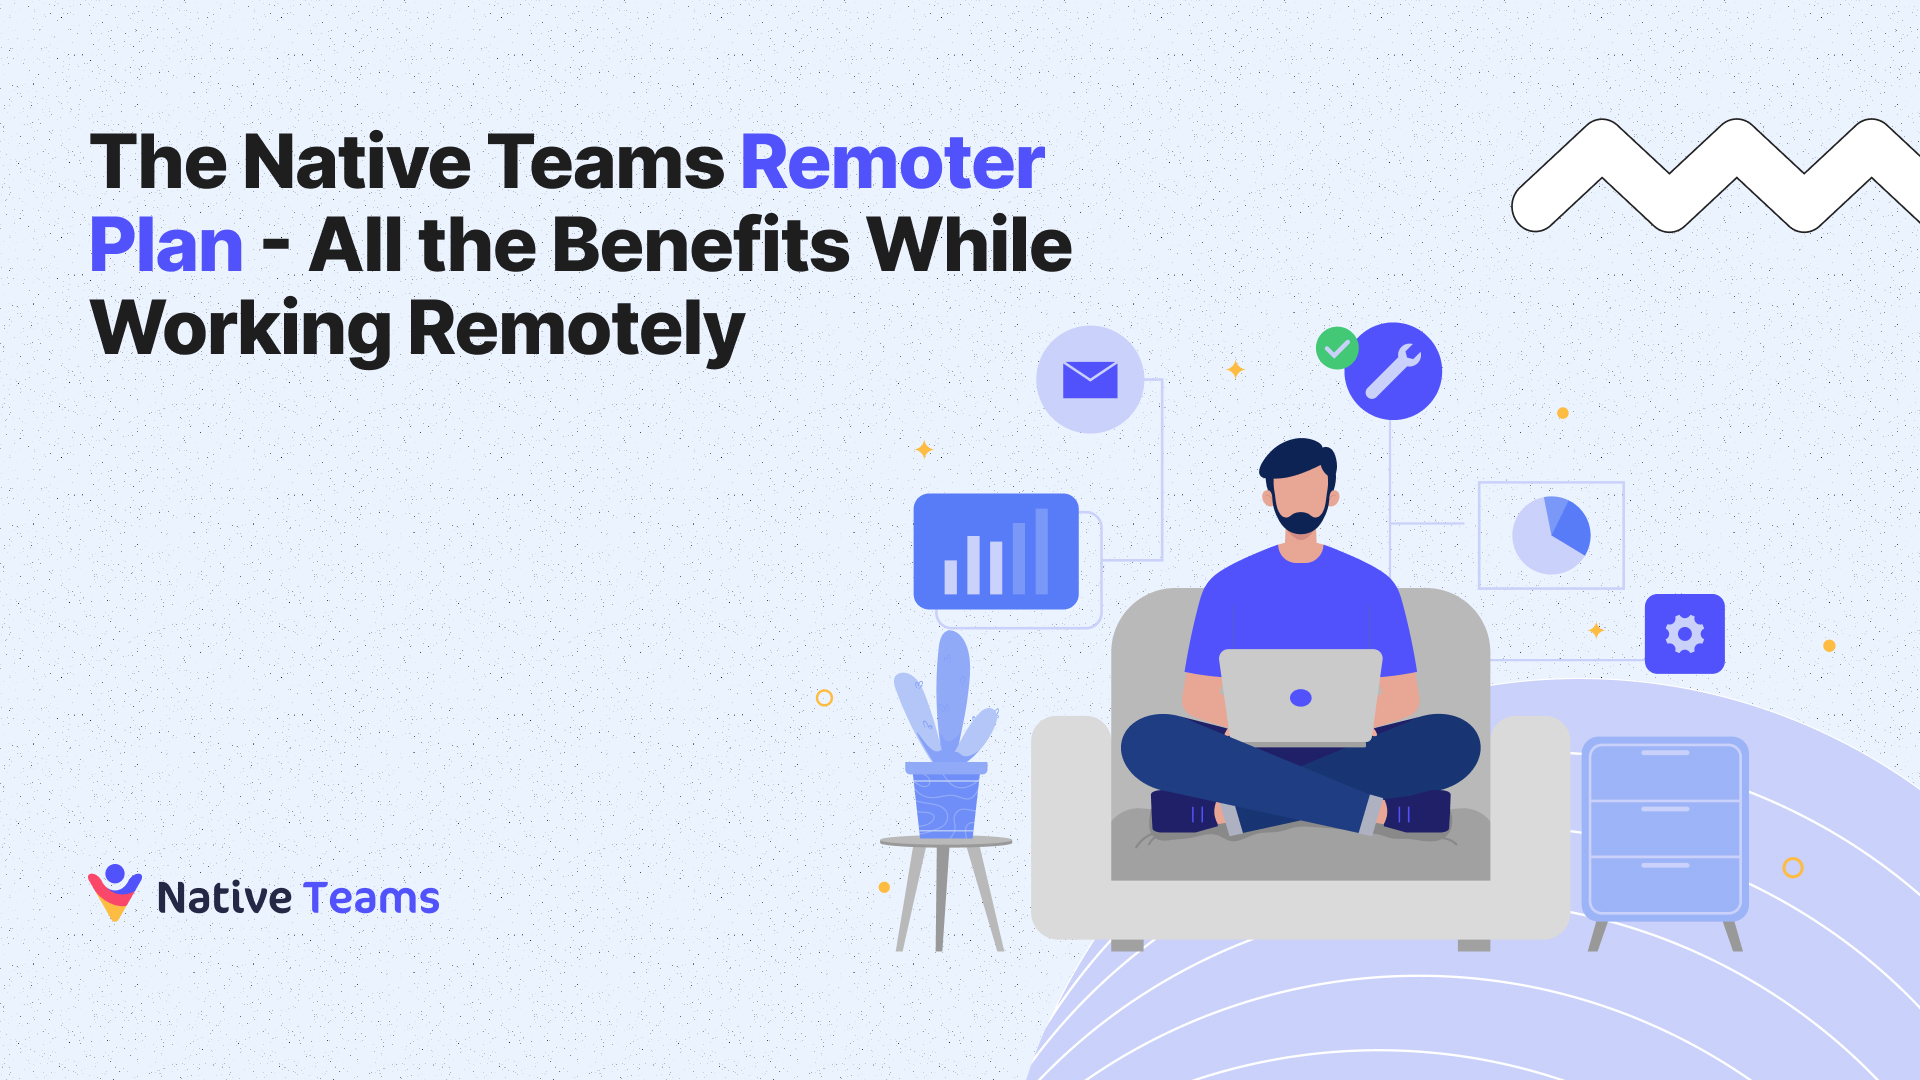 The Native Teams Remoter Plan - All the Benefits While Working Remotely